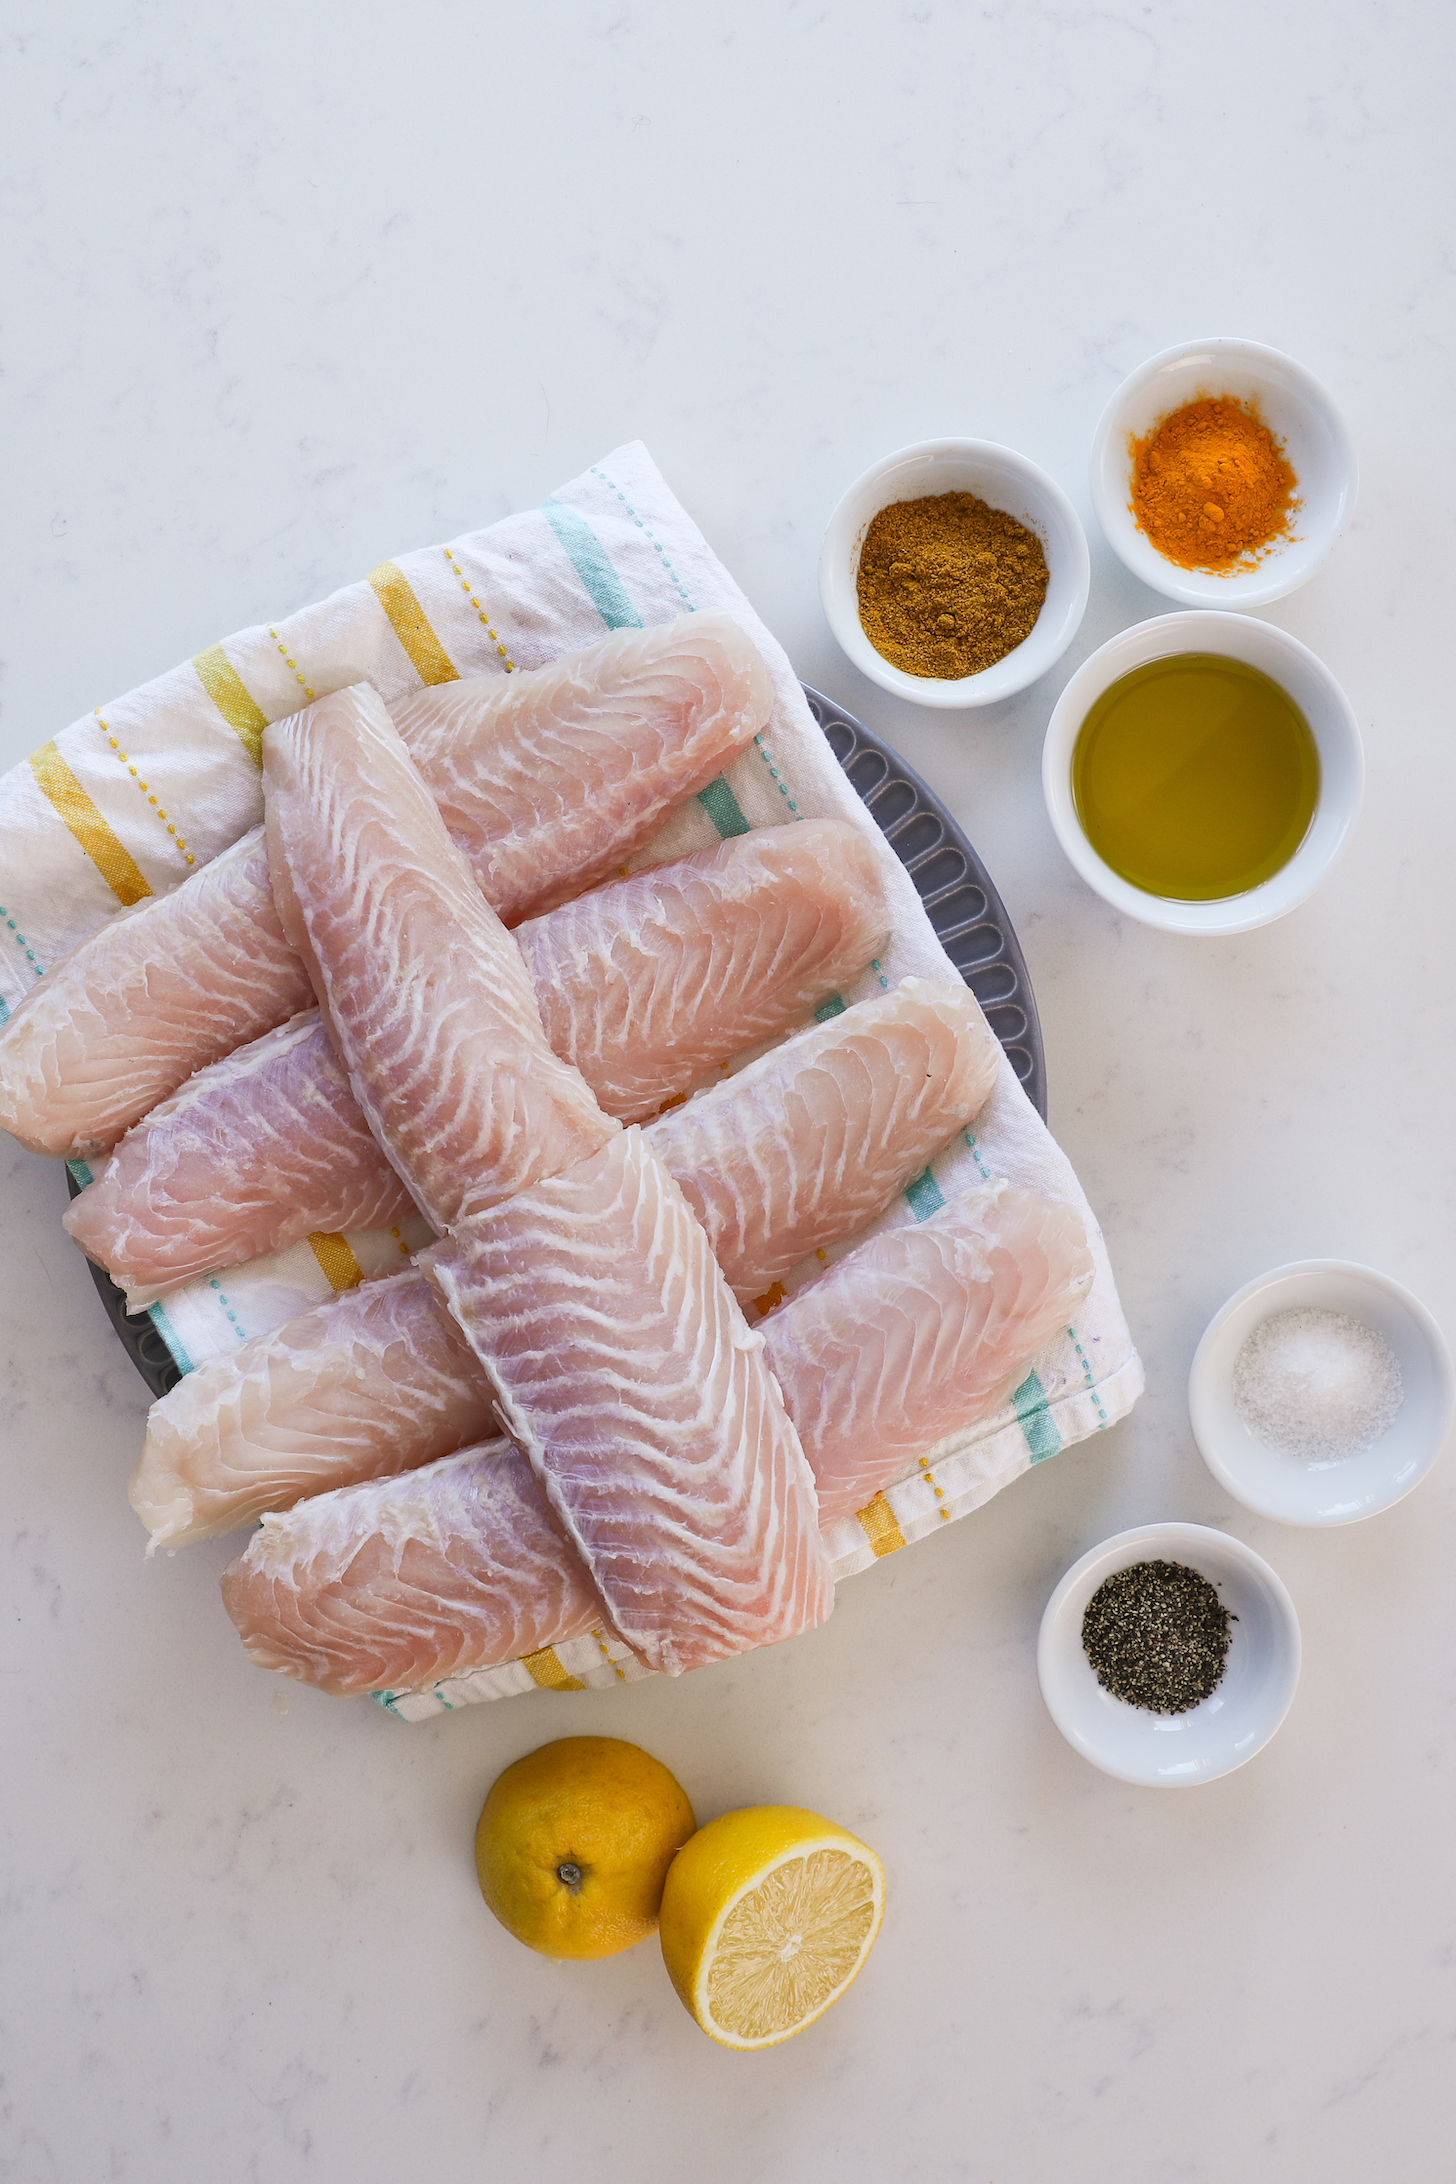 A collection of ingredients including white fish fillets, spices, oil and lemon halves.